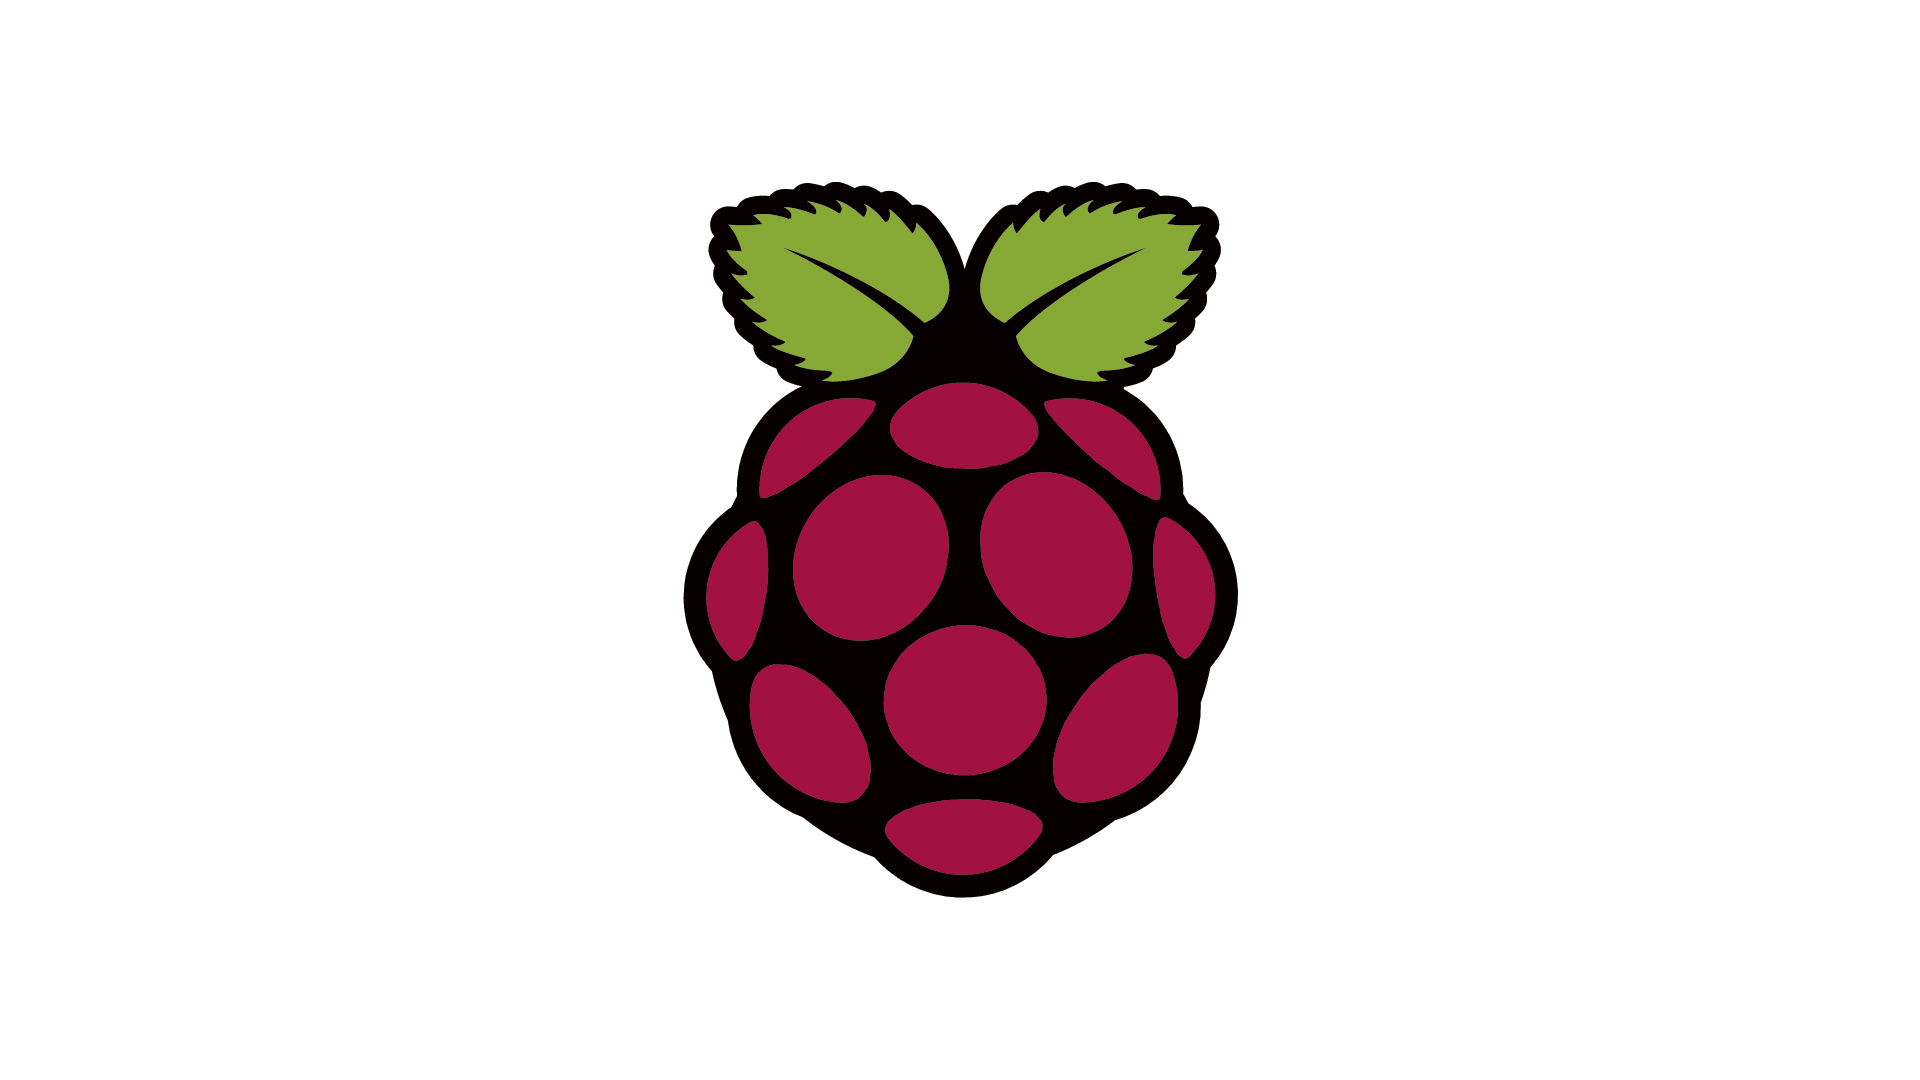 Phidgets and the Raspberry Pi